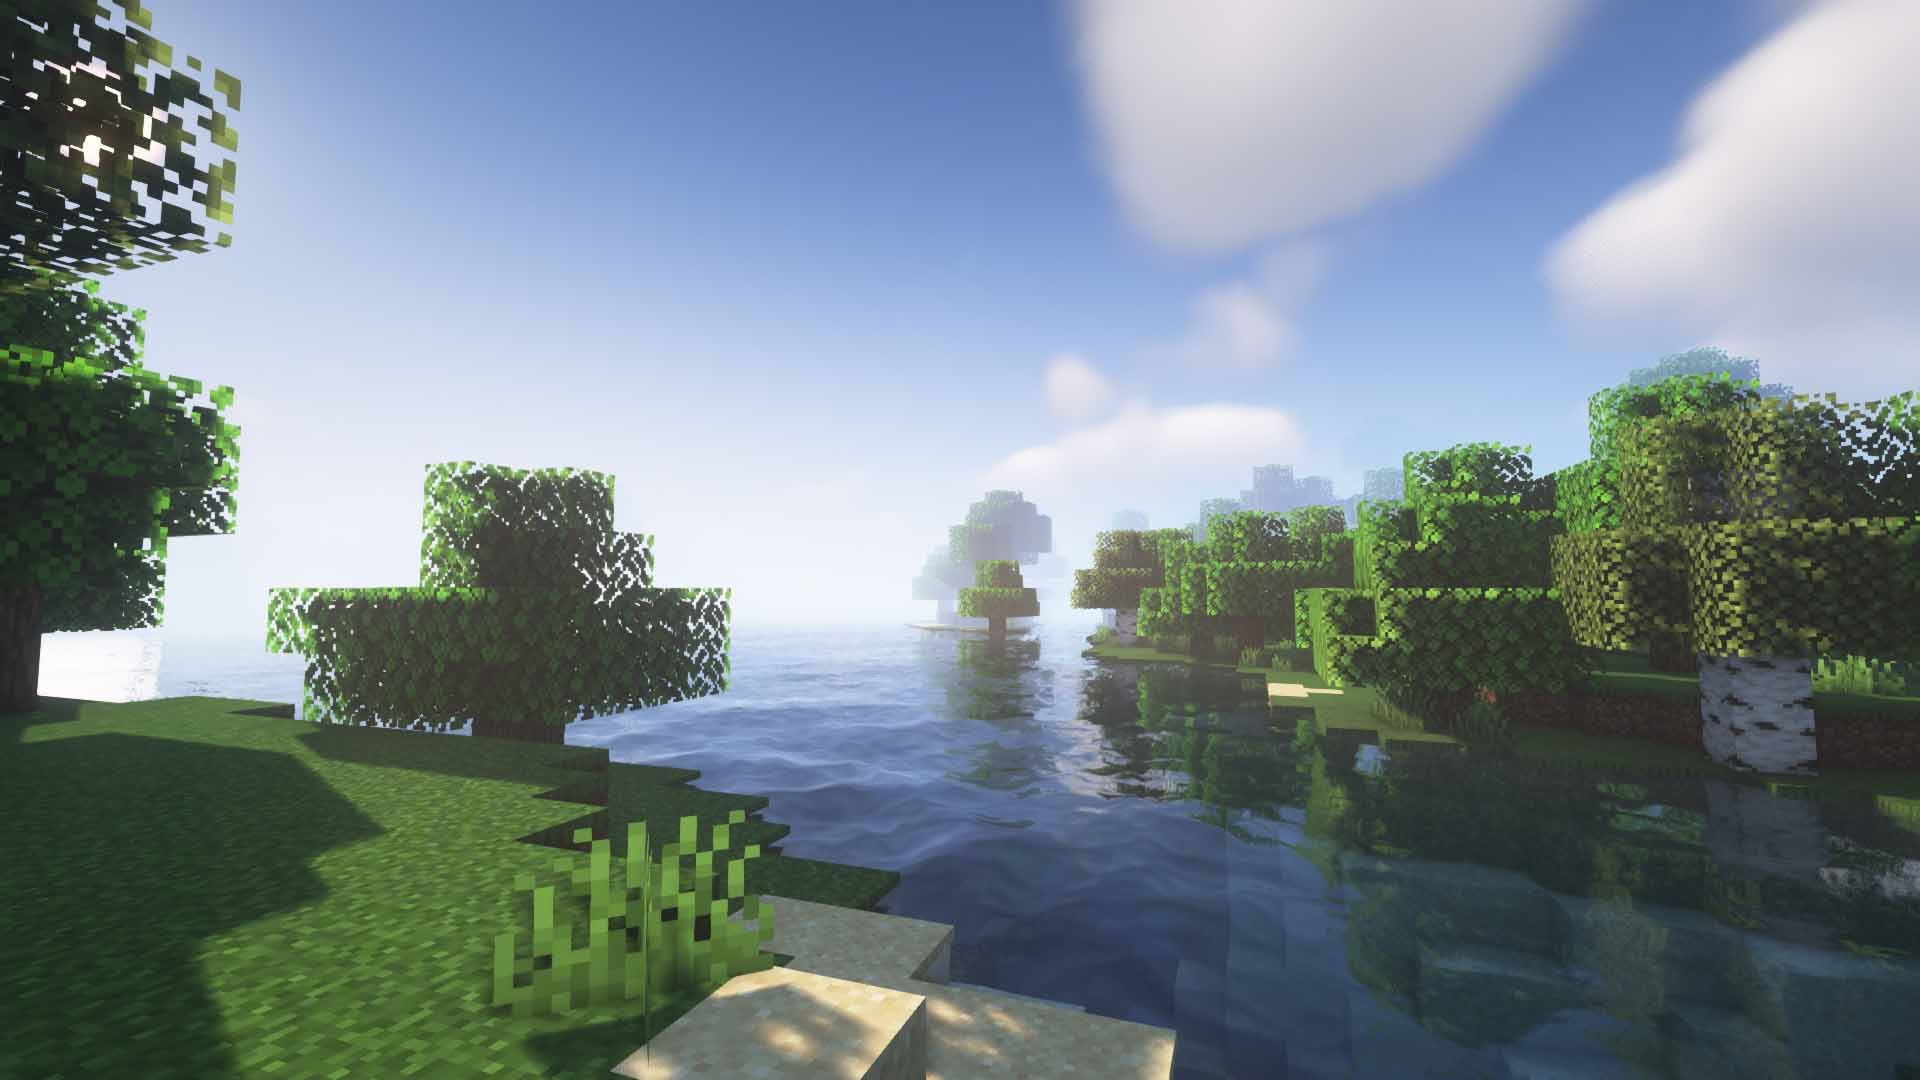 Game Decide: Download AstraLex’s Shaders Latest Version for Minecraft Java Edition for PC and install AstraLex in Minecraft graphic mods for free.